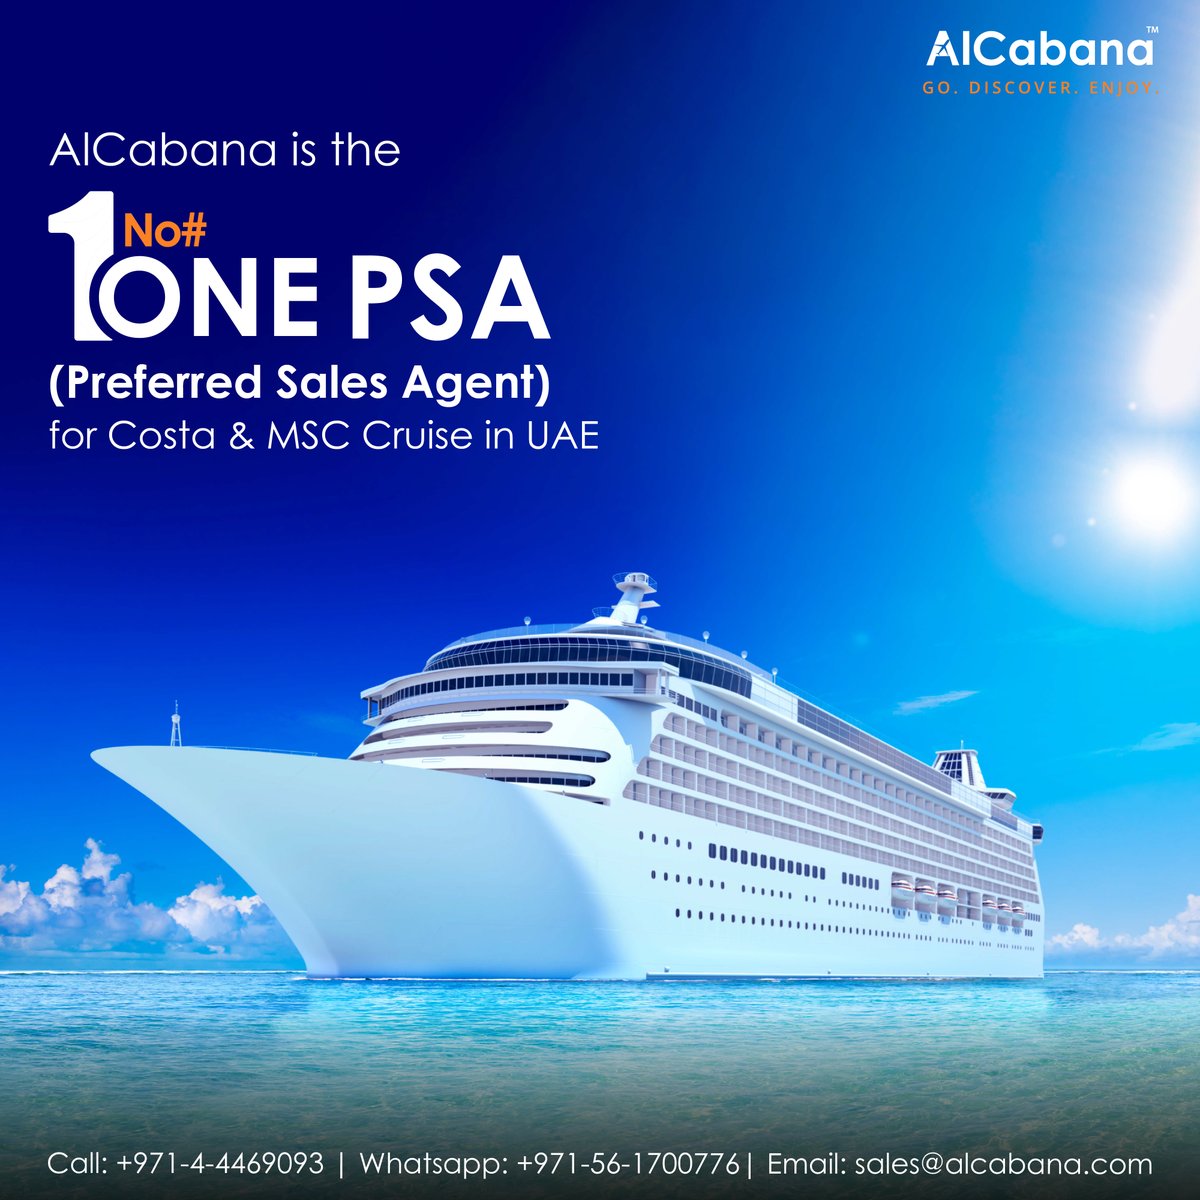 Sail into luxury with AlCabana, your No. 1 Preferred Sales Agent for Costa & MSC Cruise in the UAE. Elevate your travel experience and embark on unforgettable journeys with us.
#LuxuryCruiseExperience #AlCabana #PSA #MemorableVoyage #AlCabanaAdventures #AllInclusiveLuxury